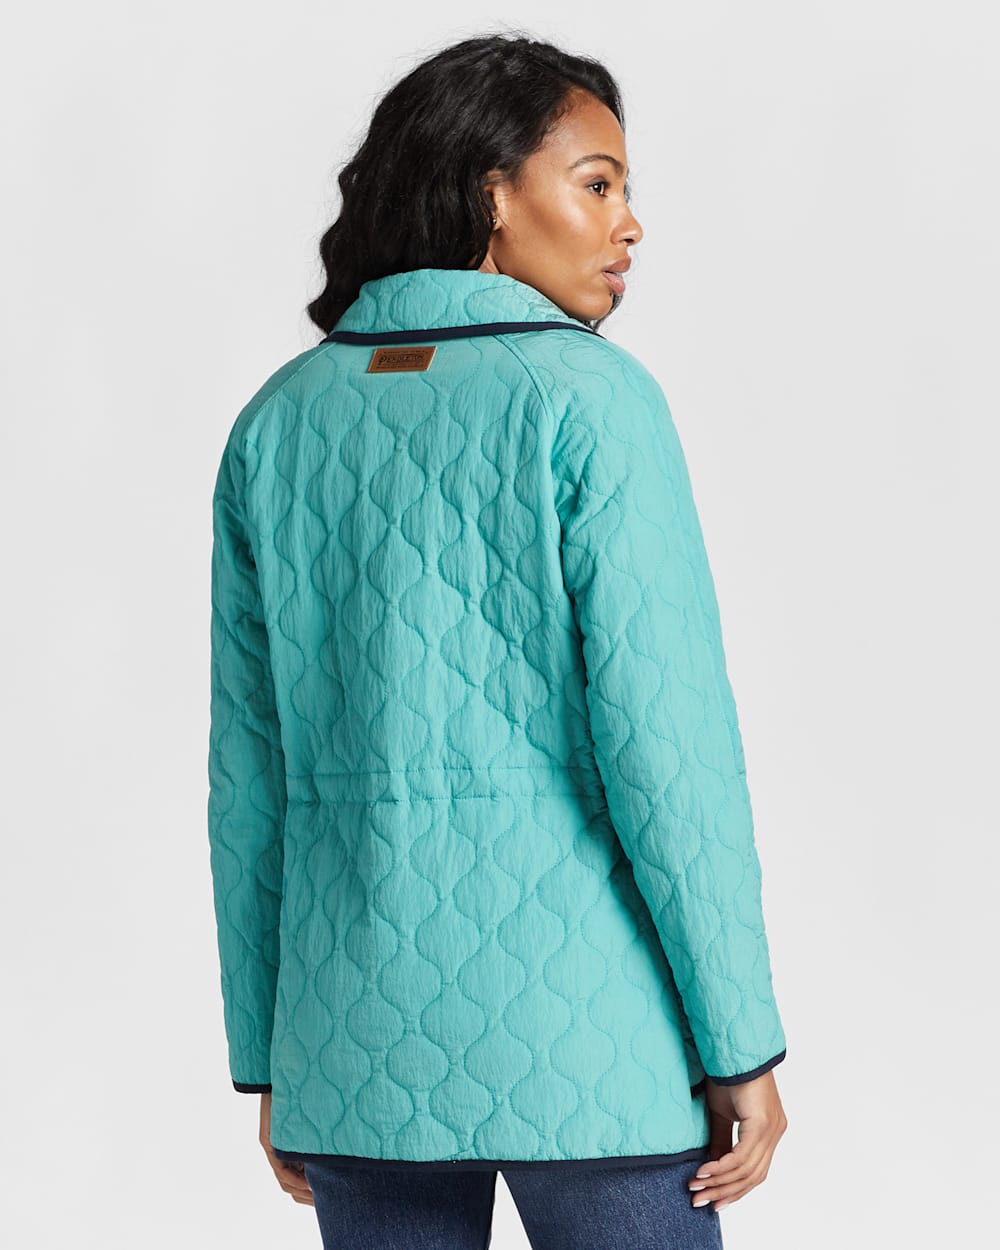 ALTERNATE VIEW OF WOMEN'S CRESCENT REVERSIBLE JACKET IN SEA BLUE image number 9